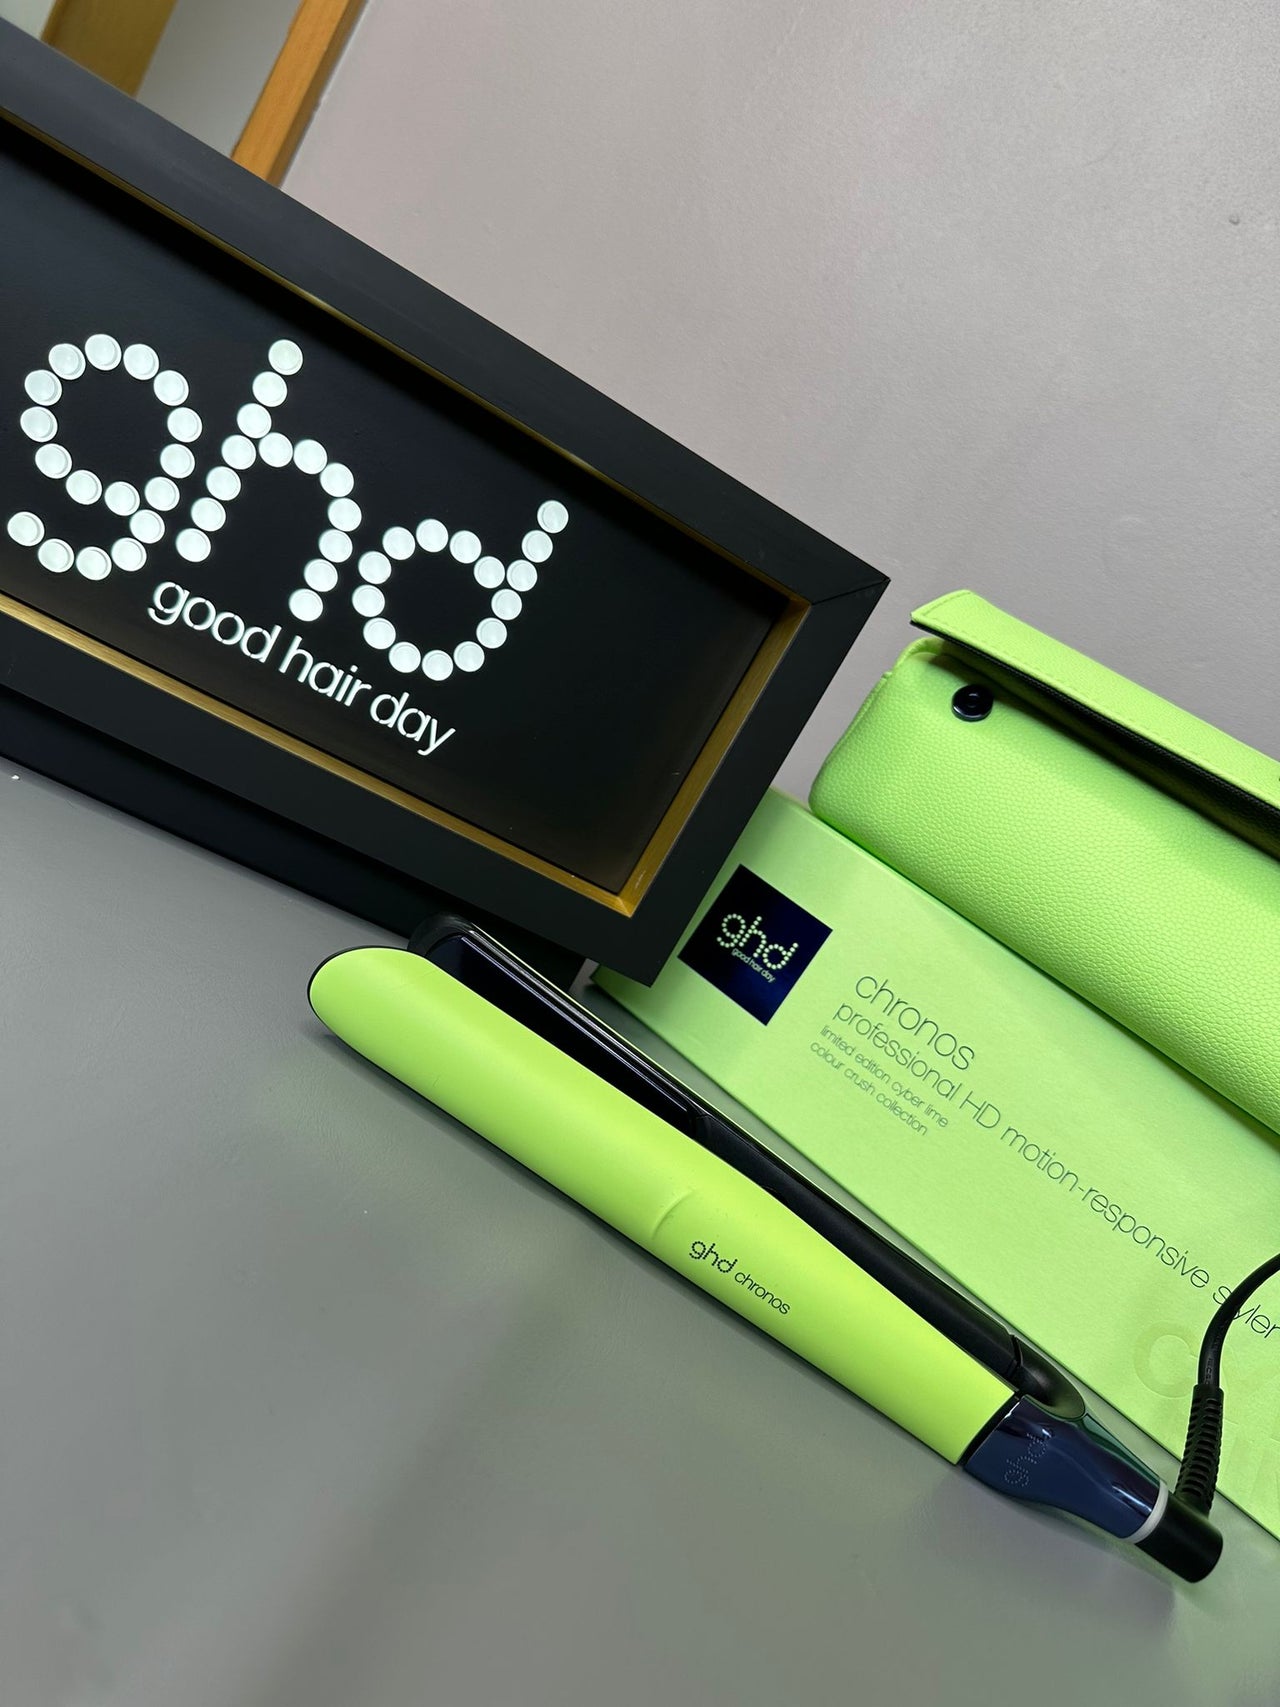 ghd chronos in cyber lime - colour crush collection